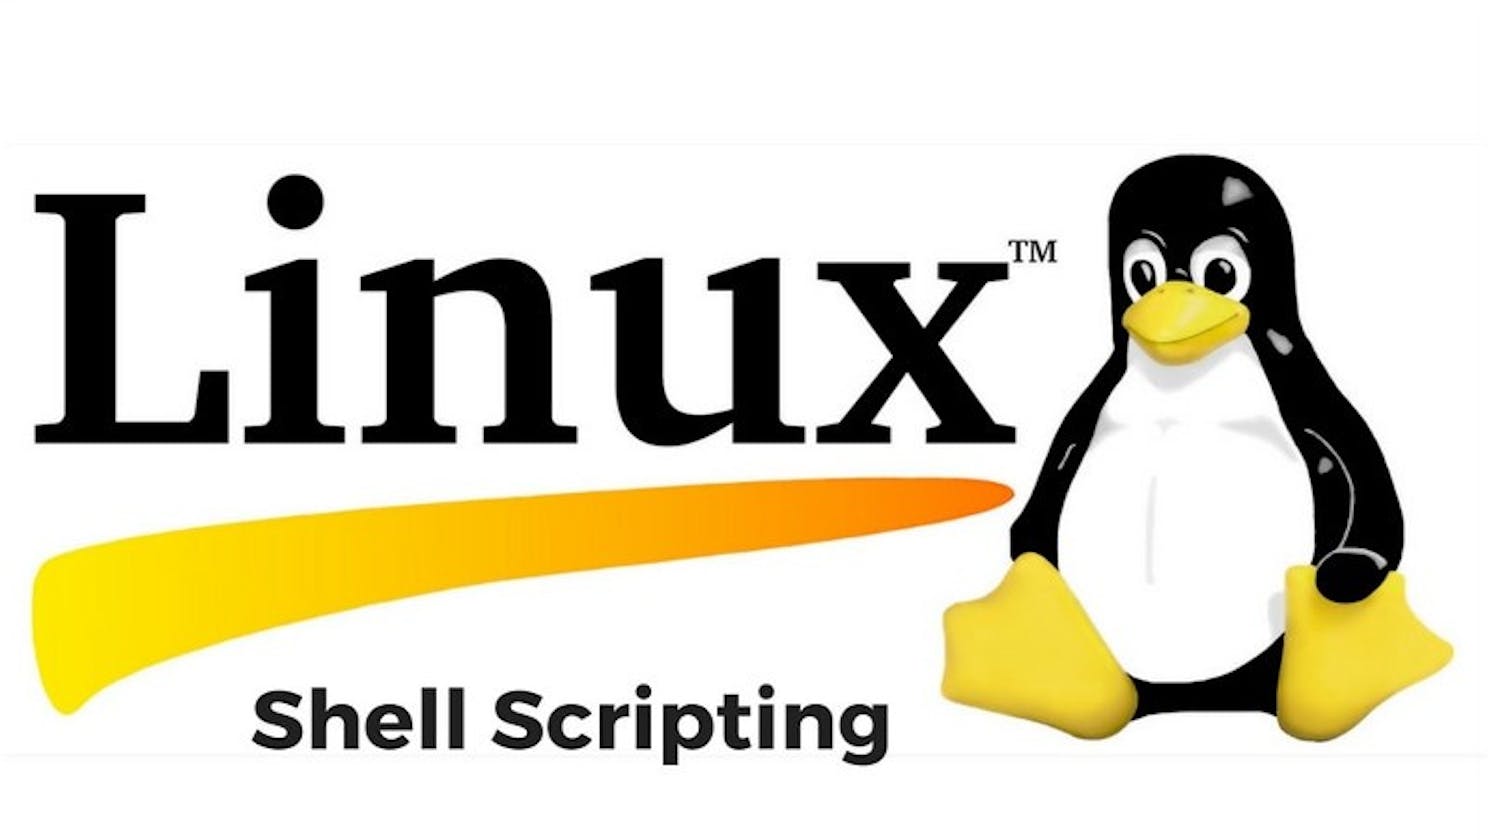 Advanced Linux Shell Scripting for DevOps Engineers with User management 🐧🚀